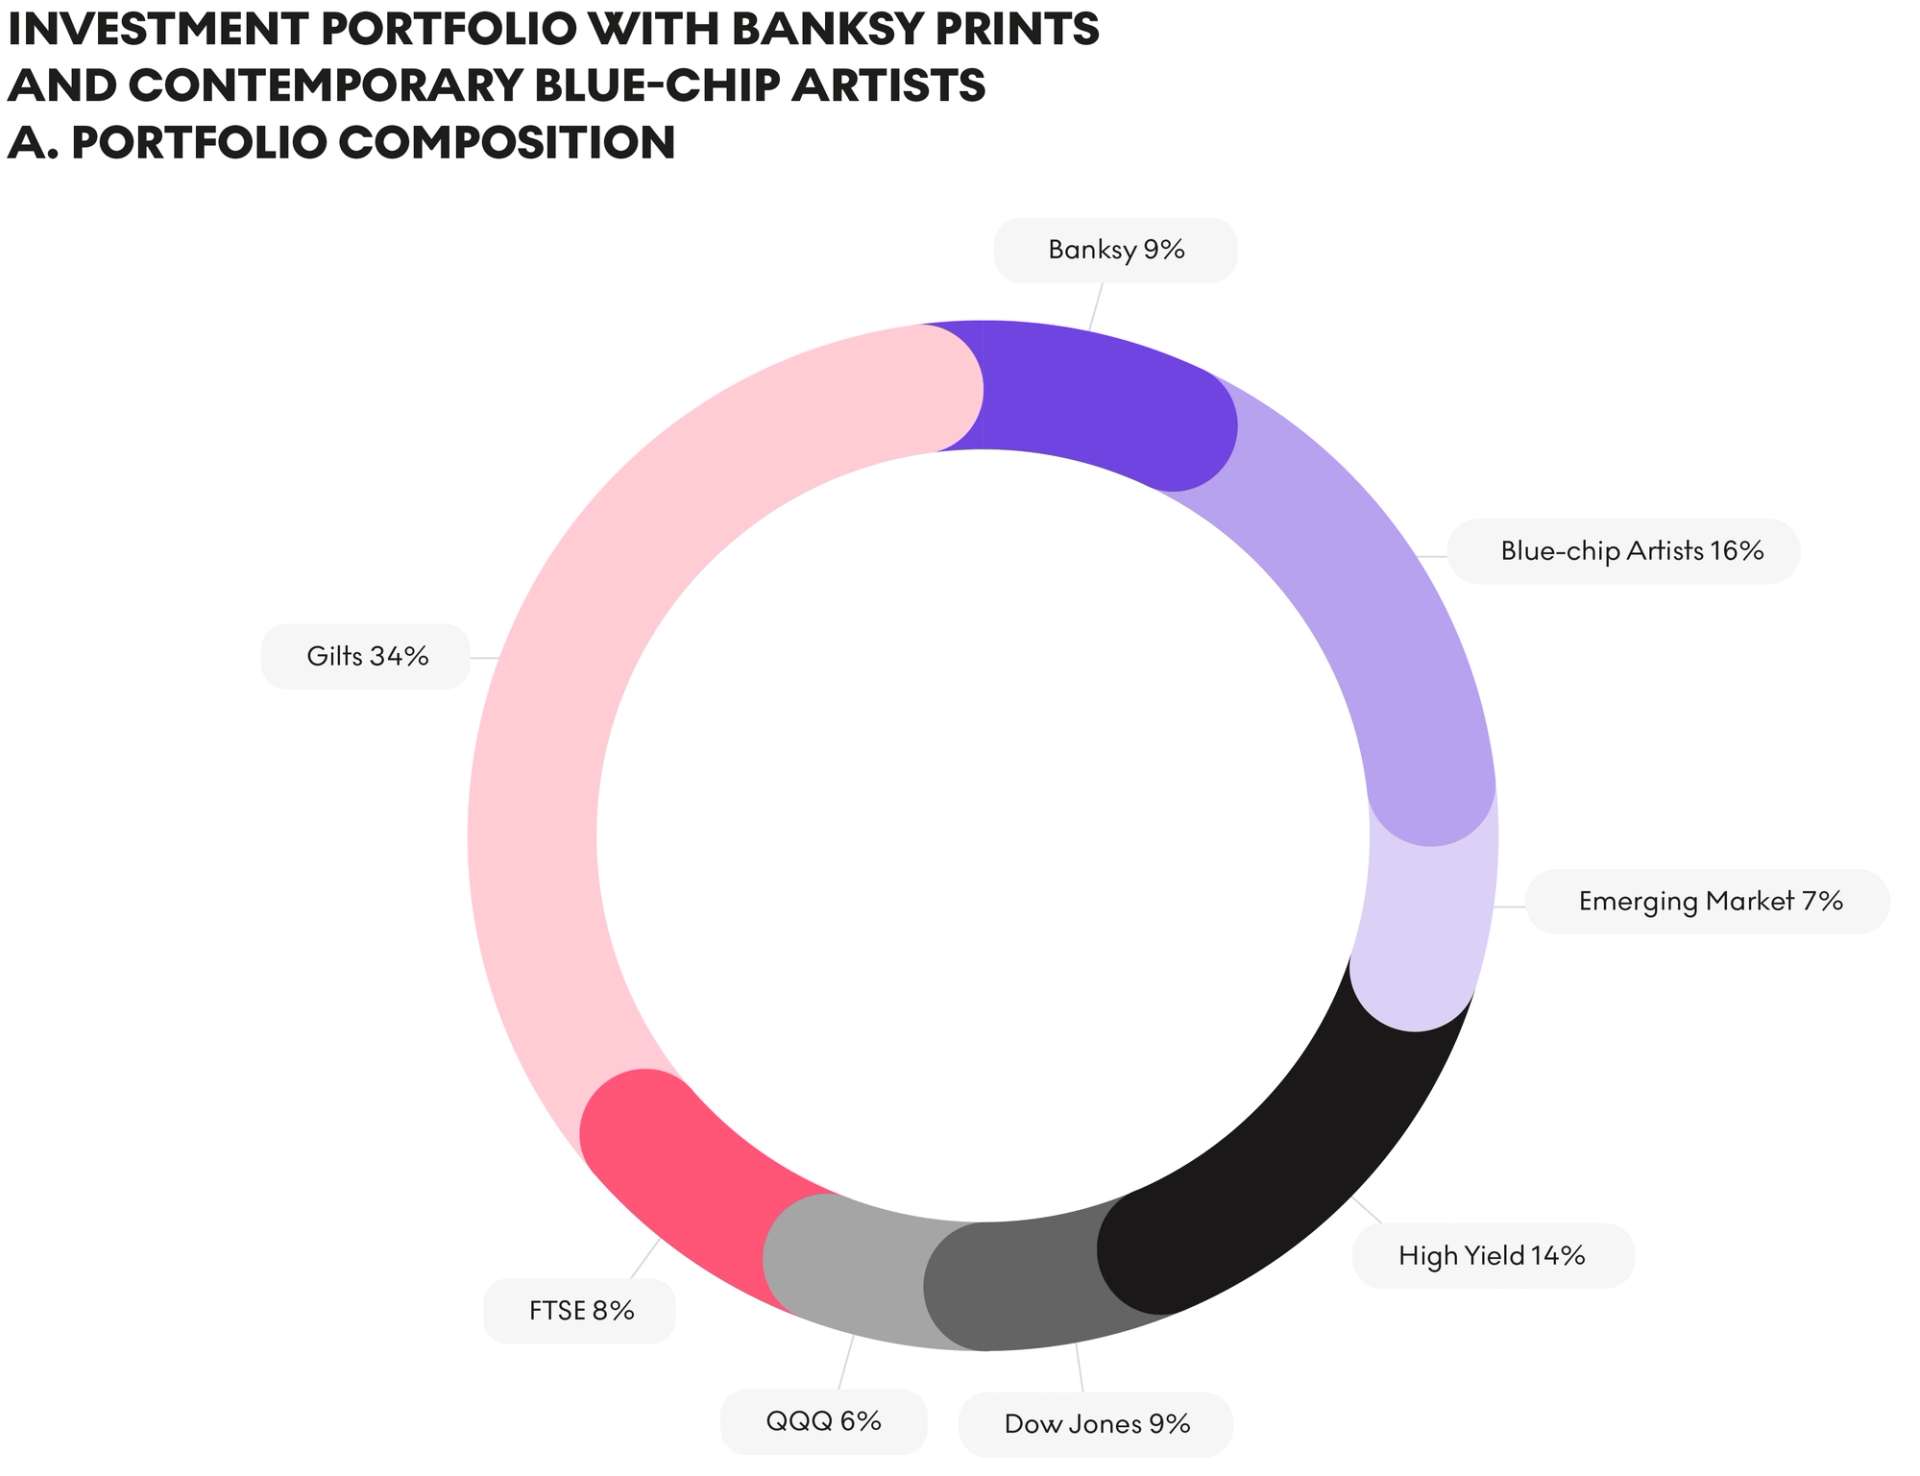 Composition of Investment Portfolio with Banksy Prints and Contemporary Blue-Chip Artists